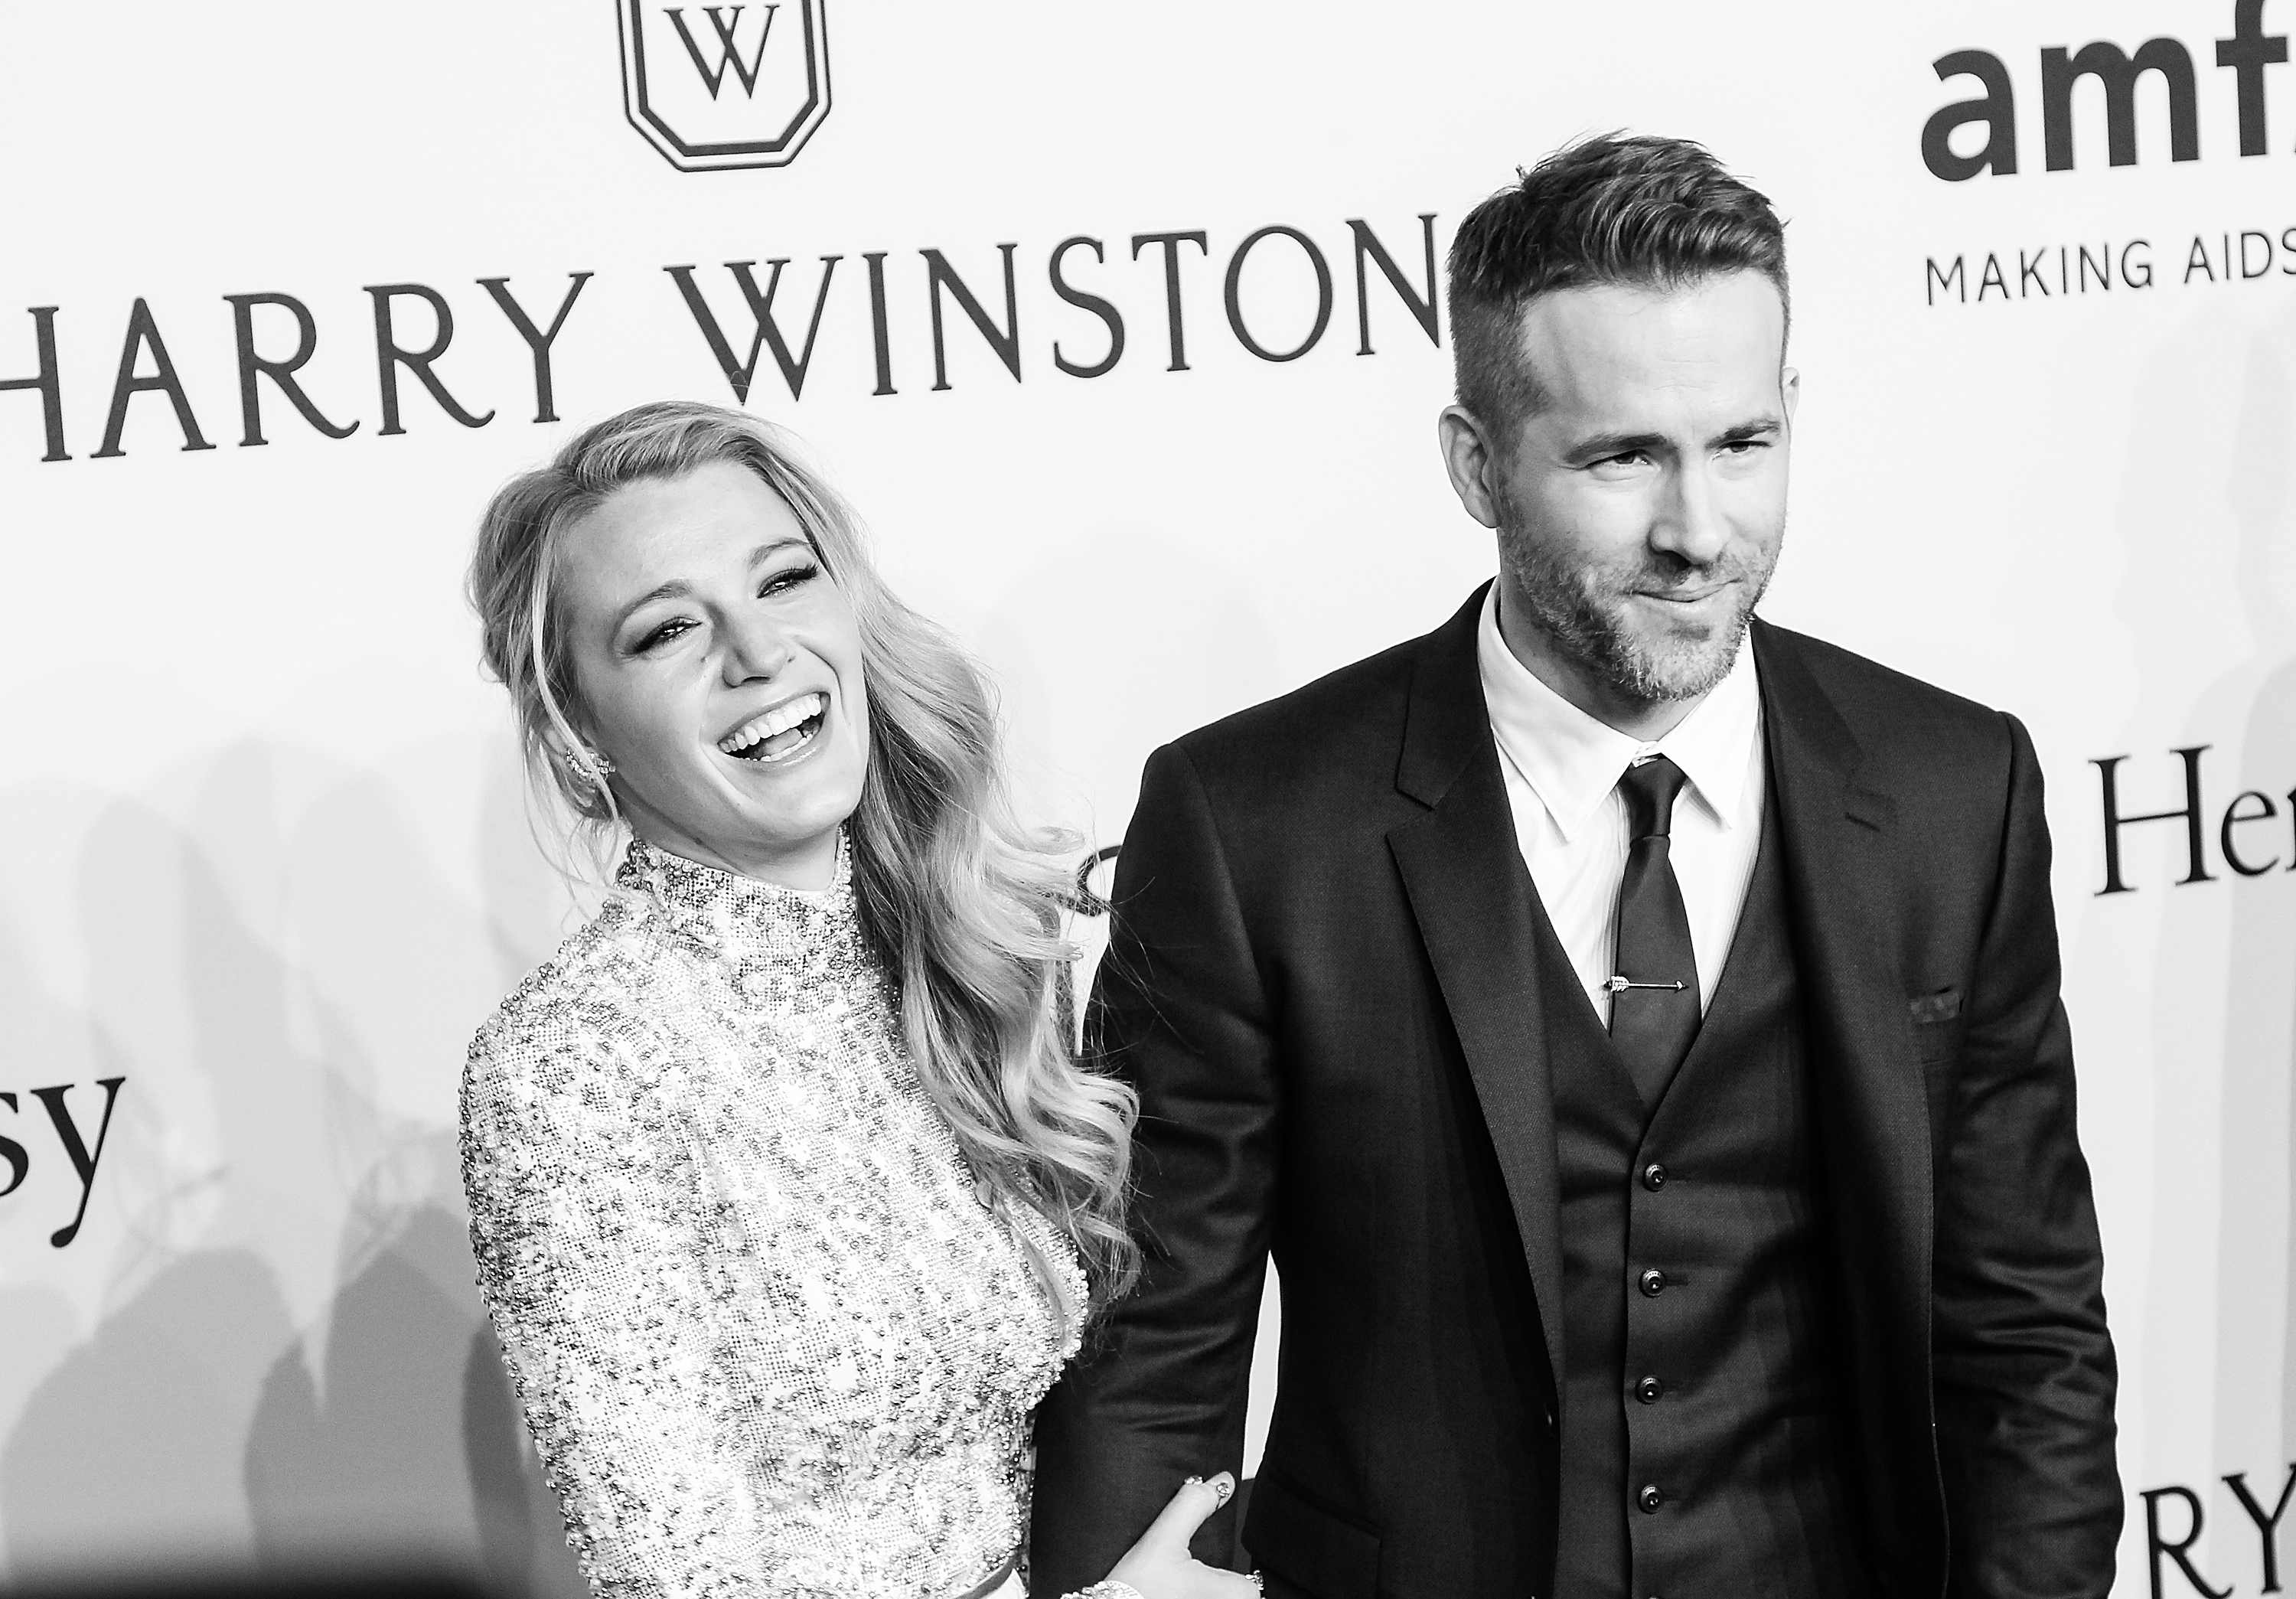 Blake Lively and Ryan Reynolds at Cipriani Wall Street on February 10, 2016 in New York City. (Bennett Raglin—Getty Images)